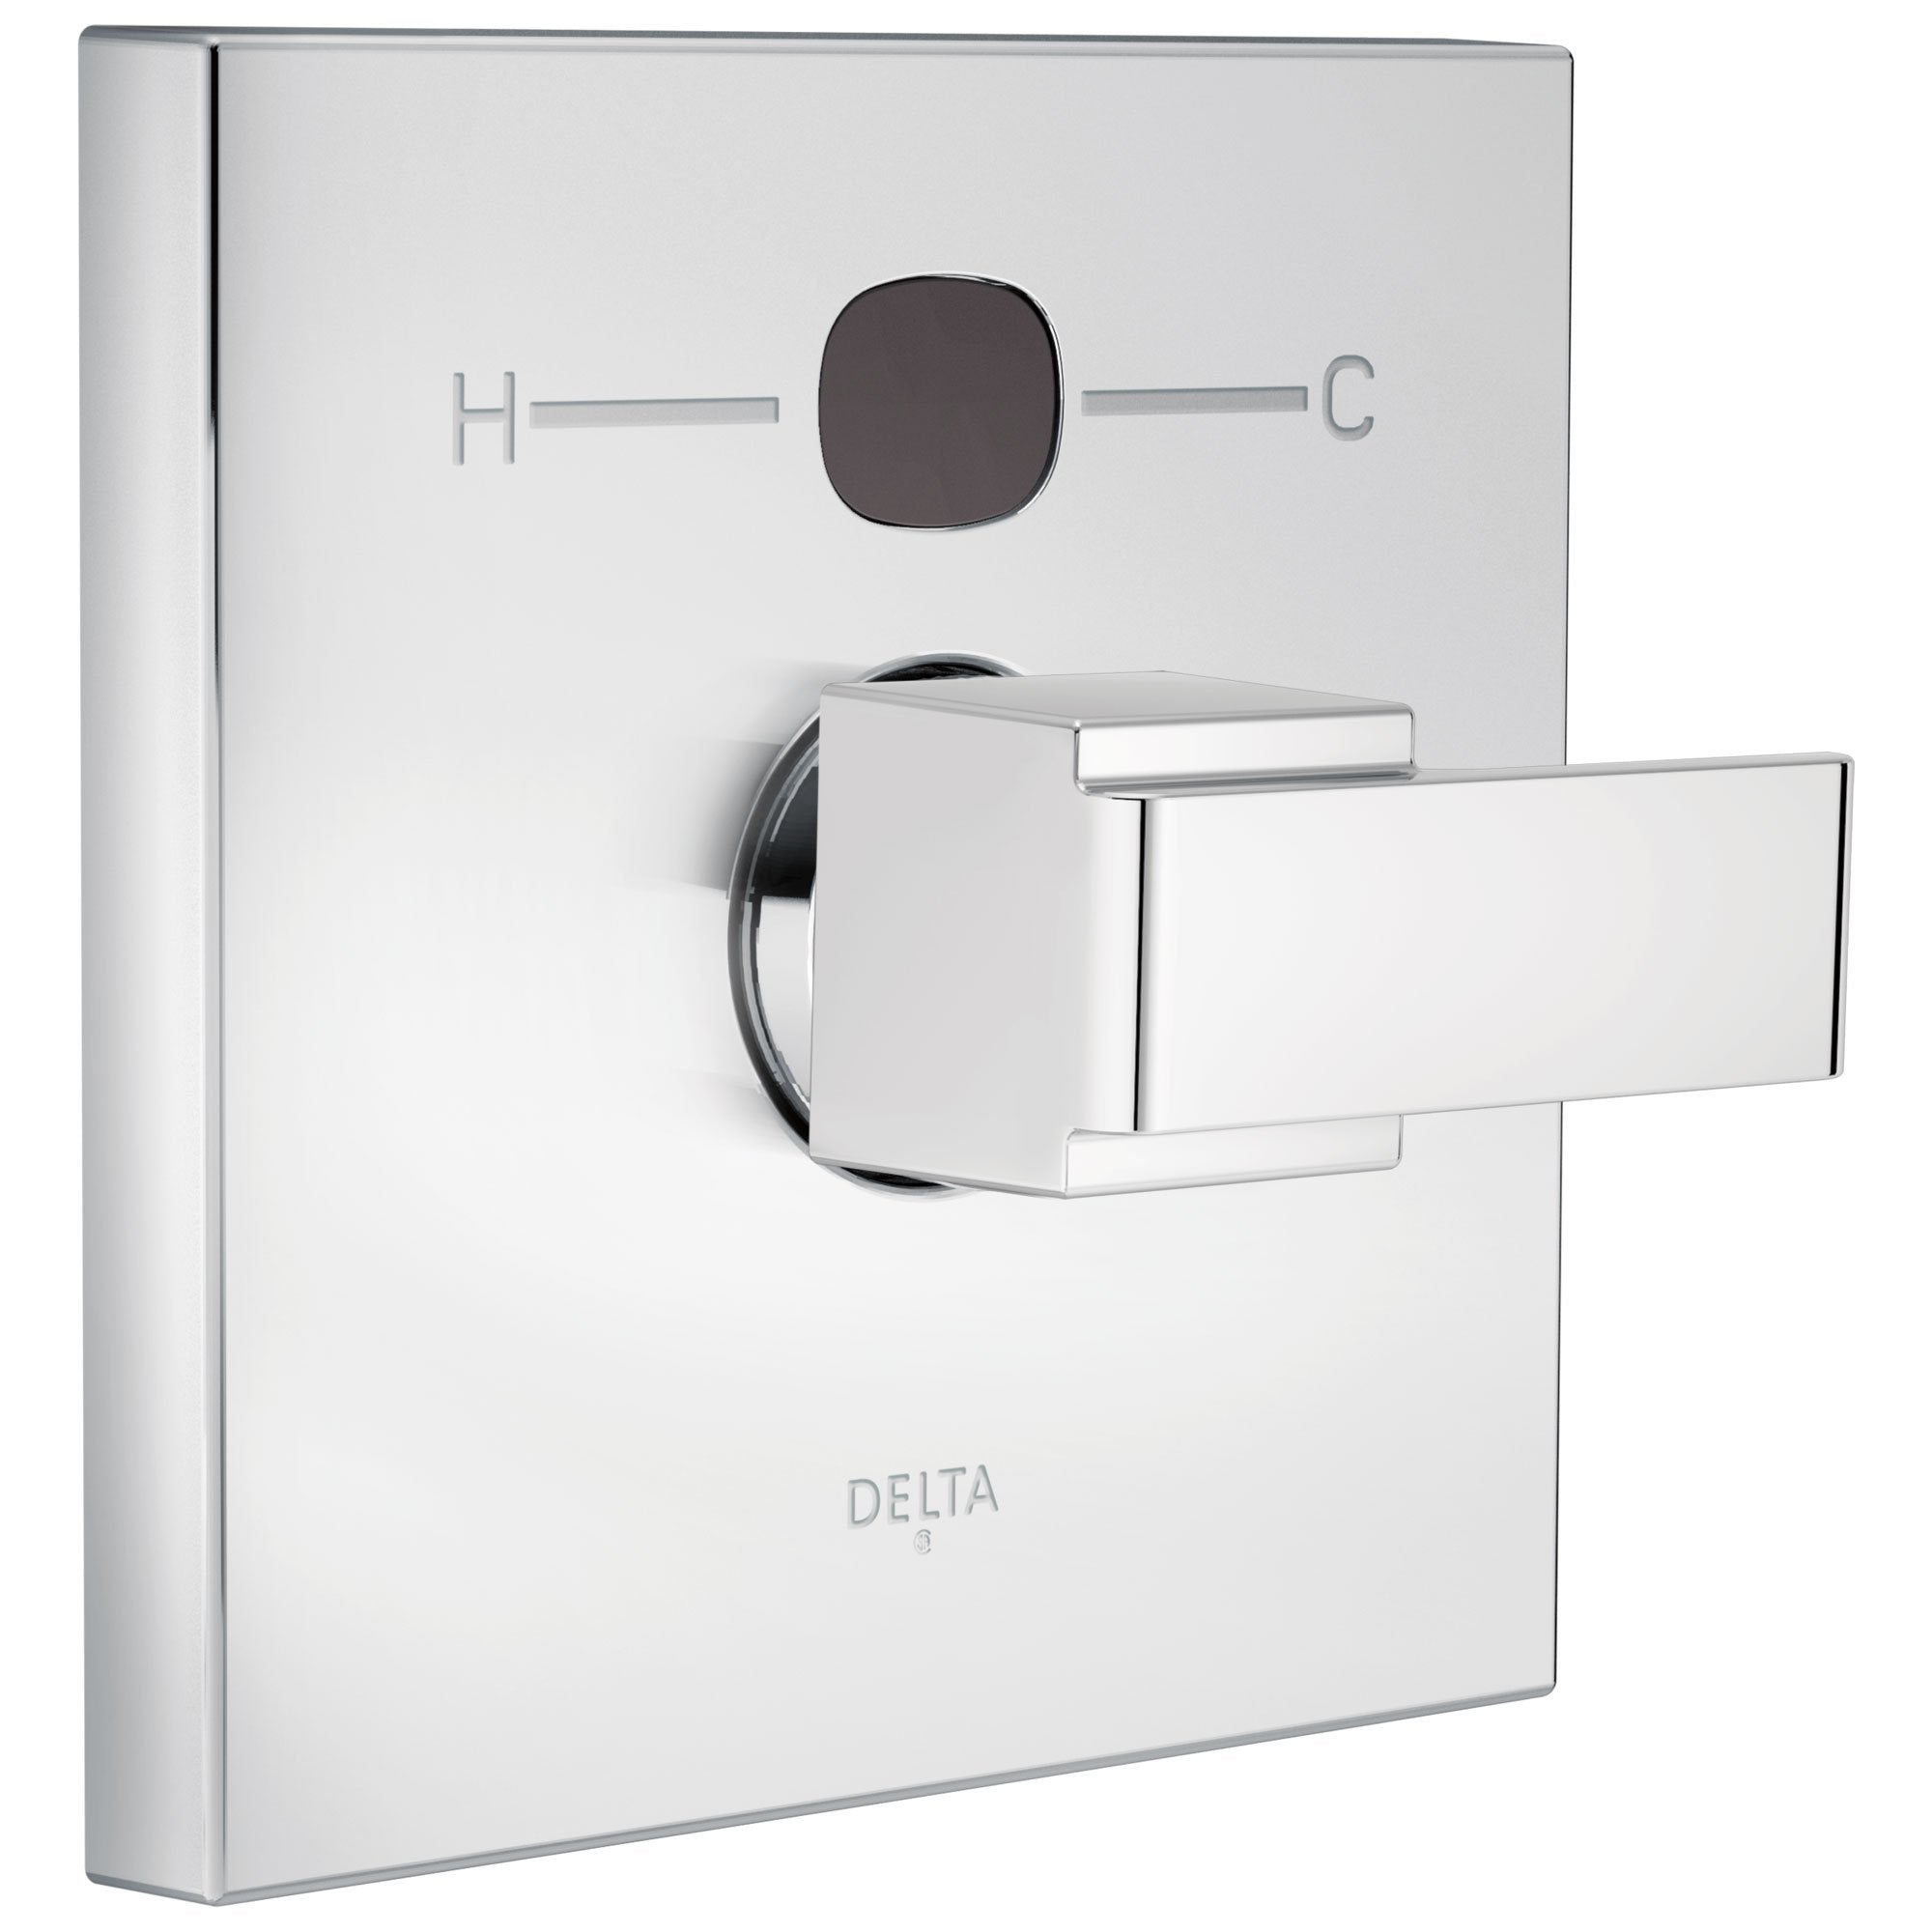 Delta Chrome Finish Ara Collection Angular Modern 14 Series Digital Display Temp2O Shower Valve Control INCLUDES Single Handle and Valve without Stops D1627V